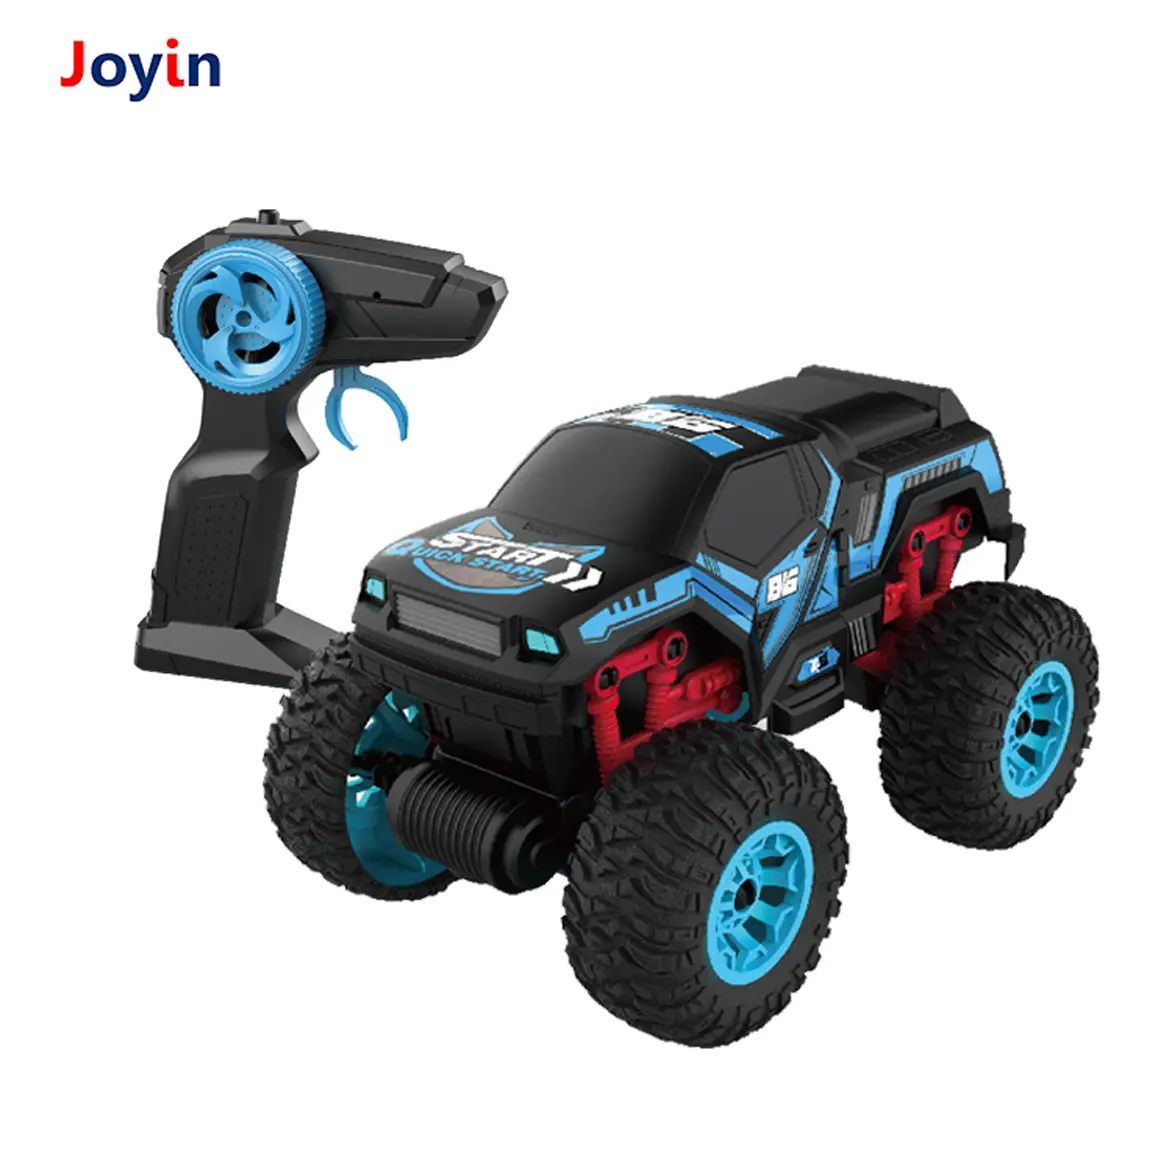 1:16 2.4GHz RC Off-Road Car Toys High Speed Electric Remote Control Monster Truck Military Rock Crawler for Kids